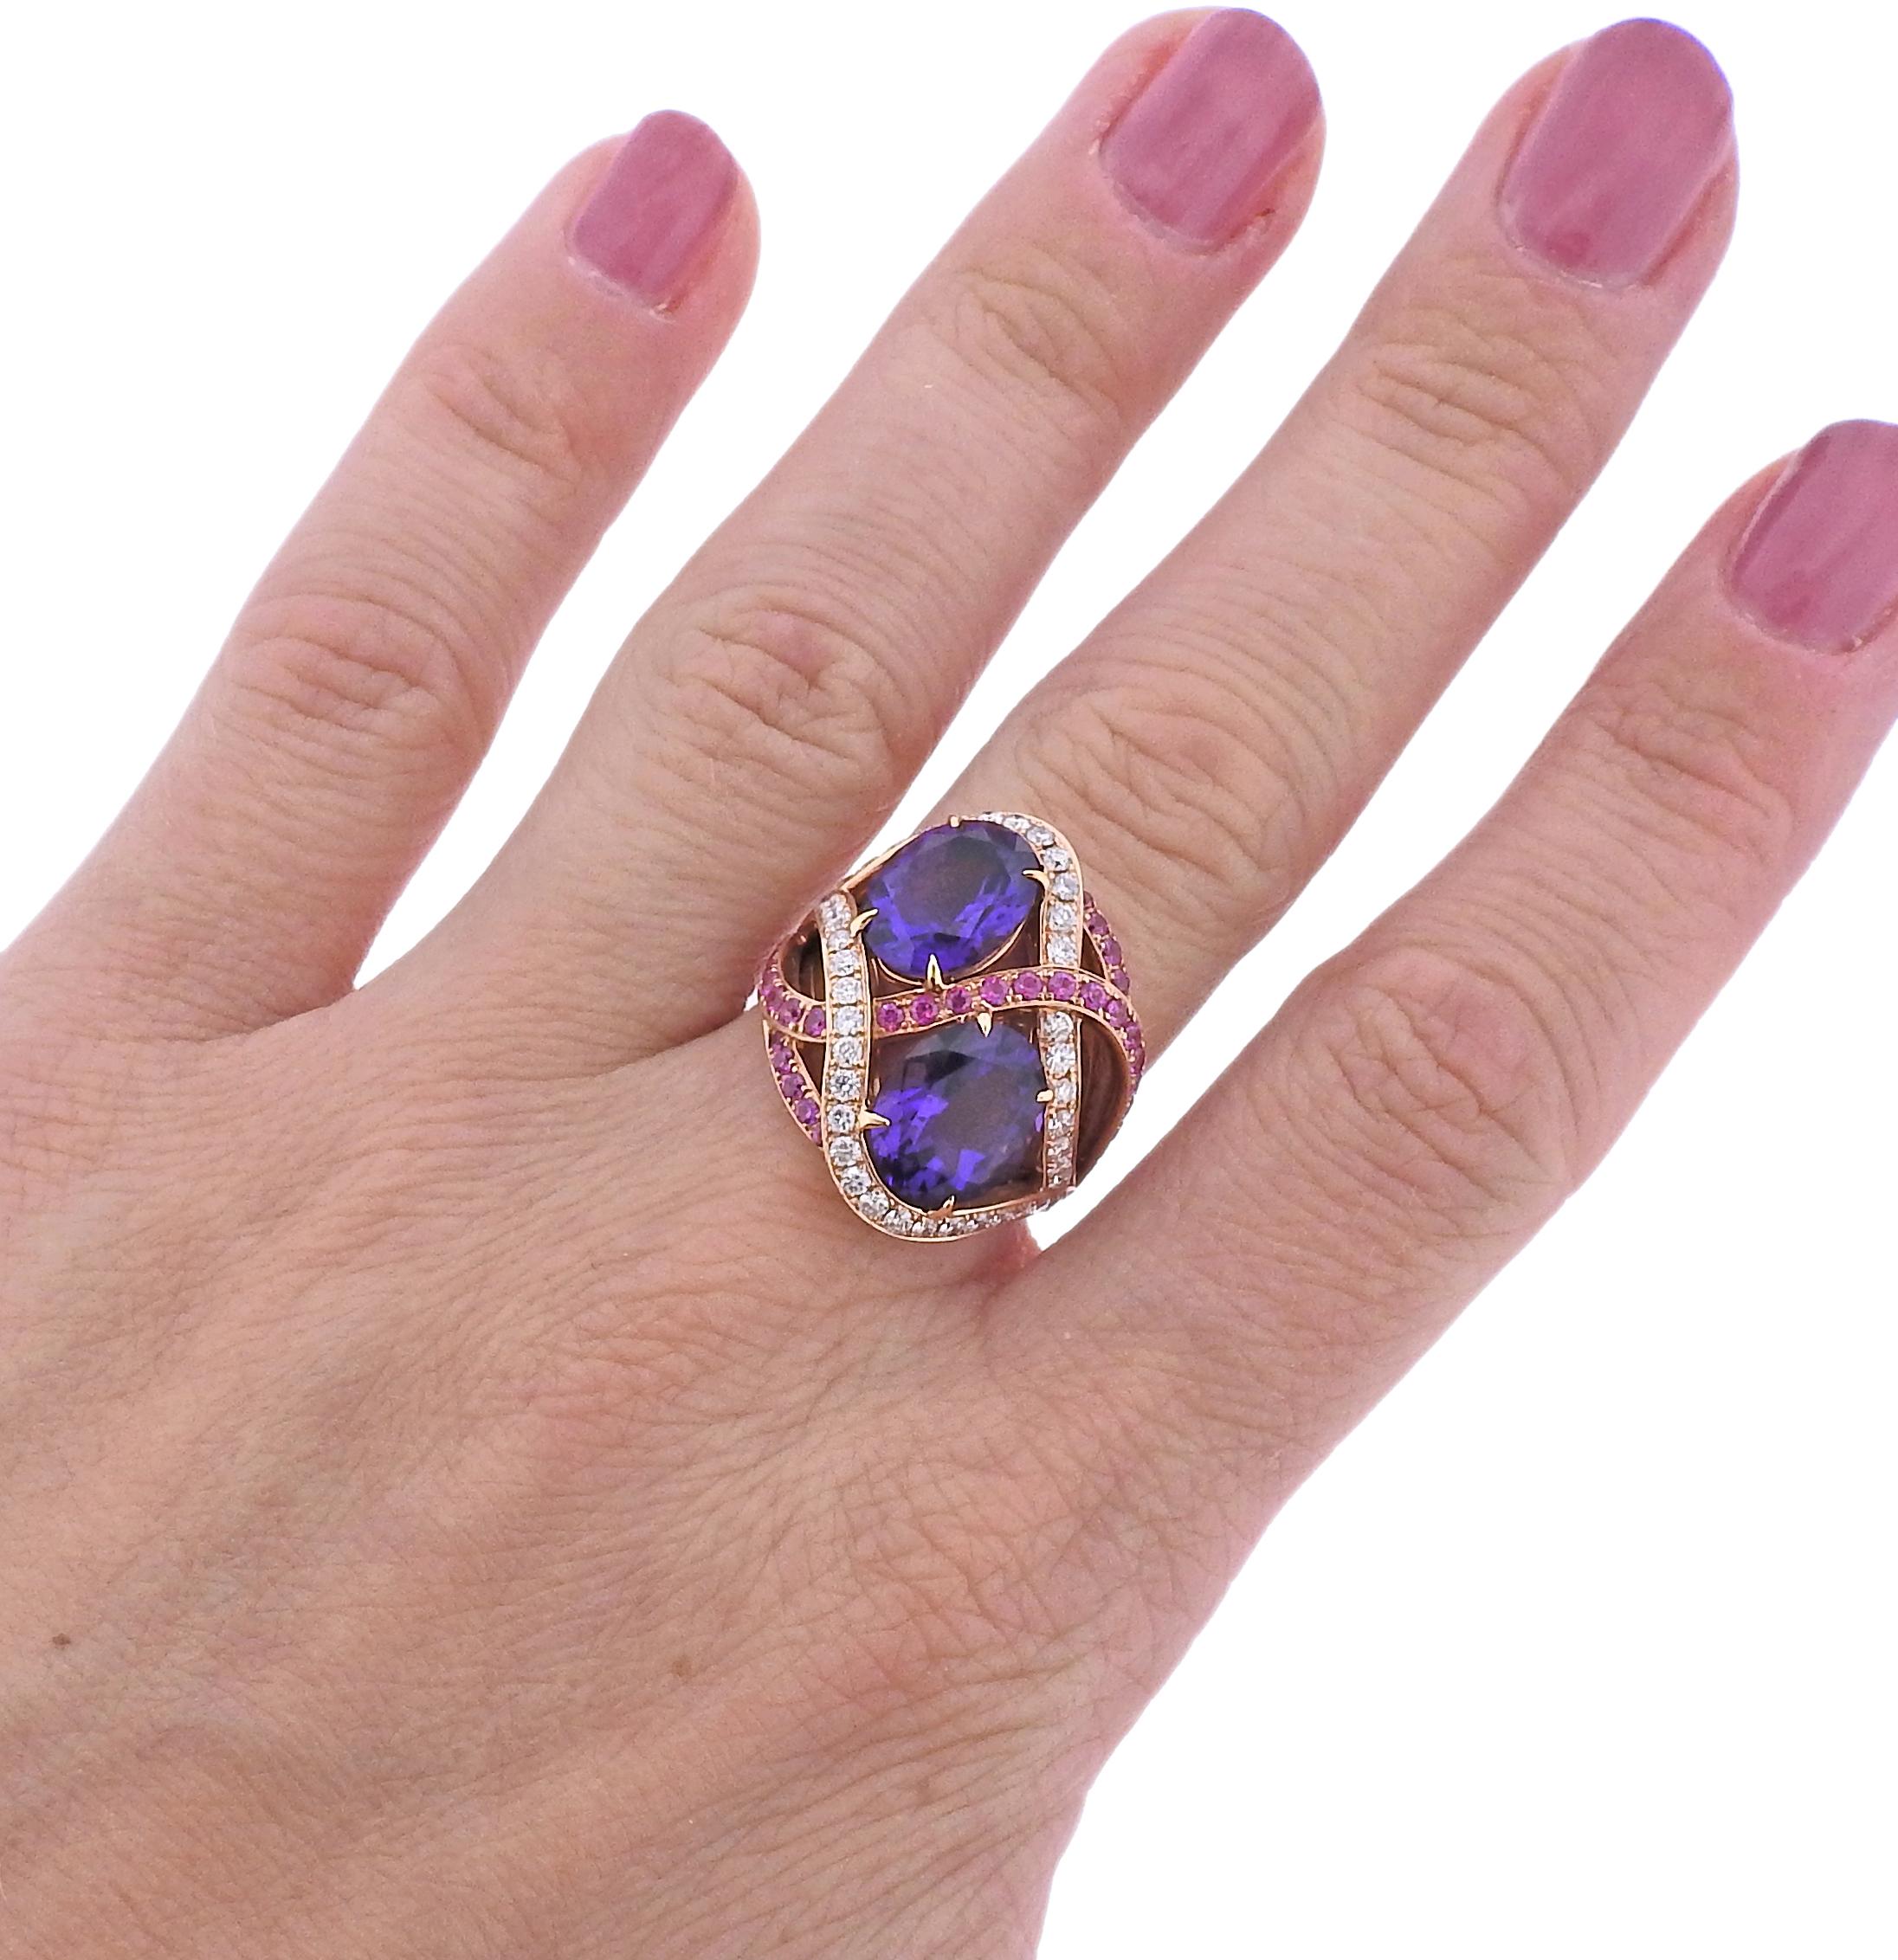 Brand new with tag Bucherer 18k gold ring, with 0.85ctw G/VS diamonds, 6.44ctw amethyst and 0.80ctw sapphires.  Comes with box. Ring size - 7, ring top is 25mm wide.  Weight - 13.2 grams. Marked: CB 750.